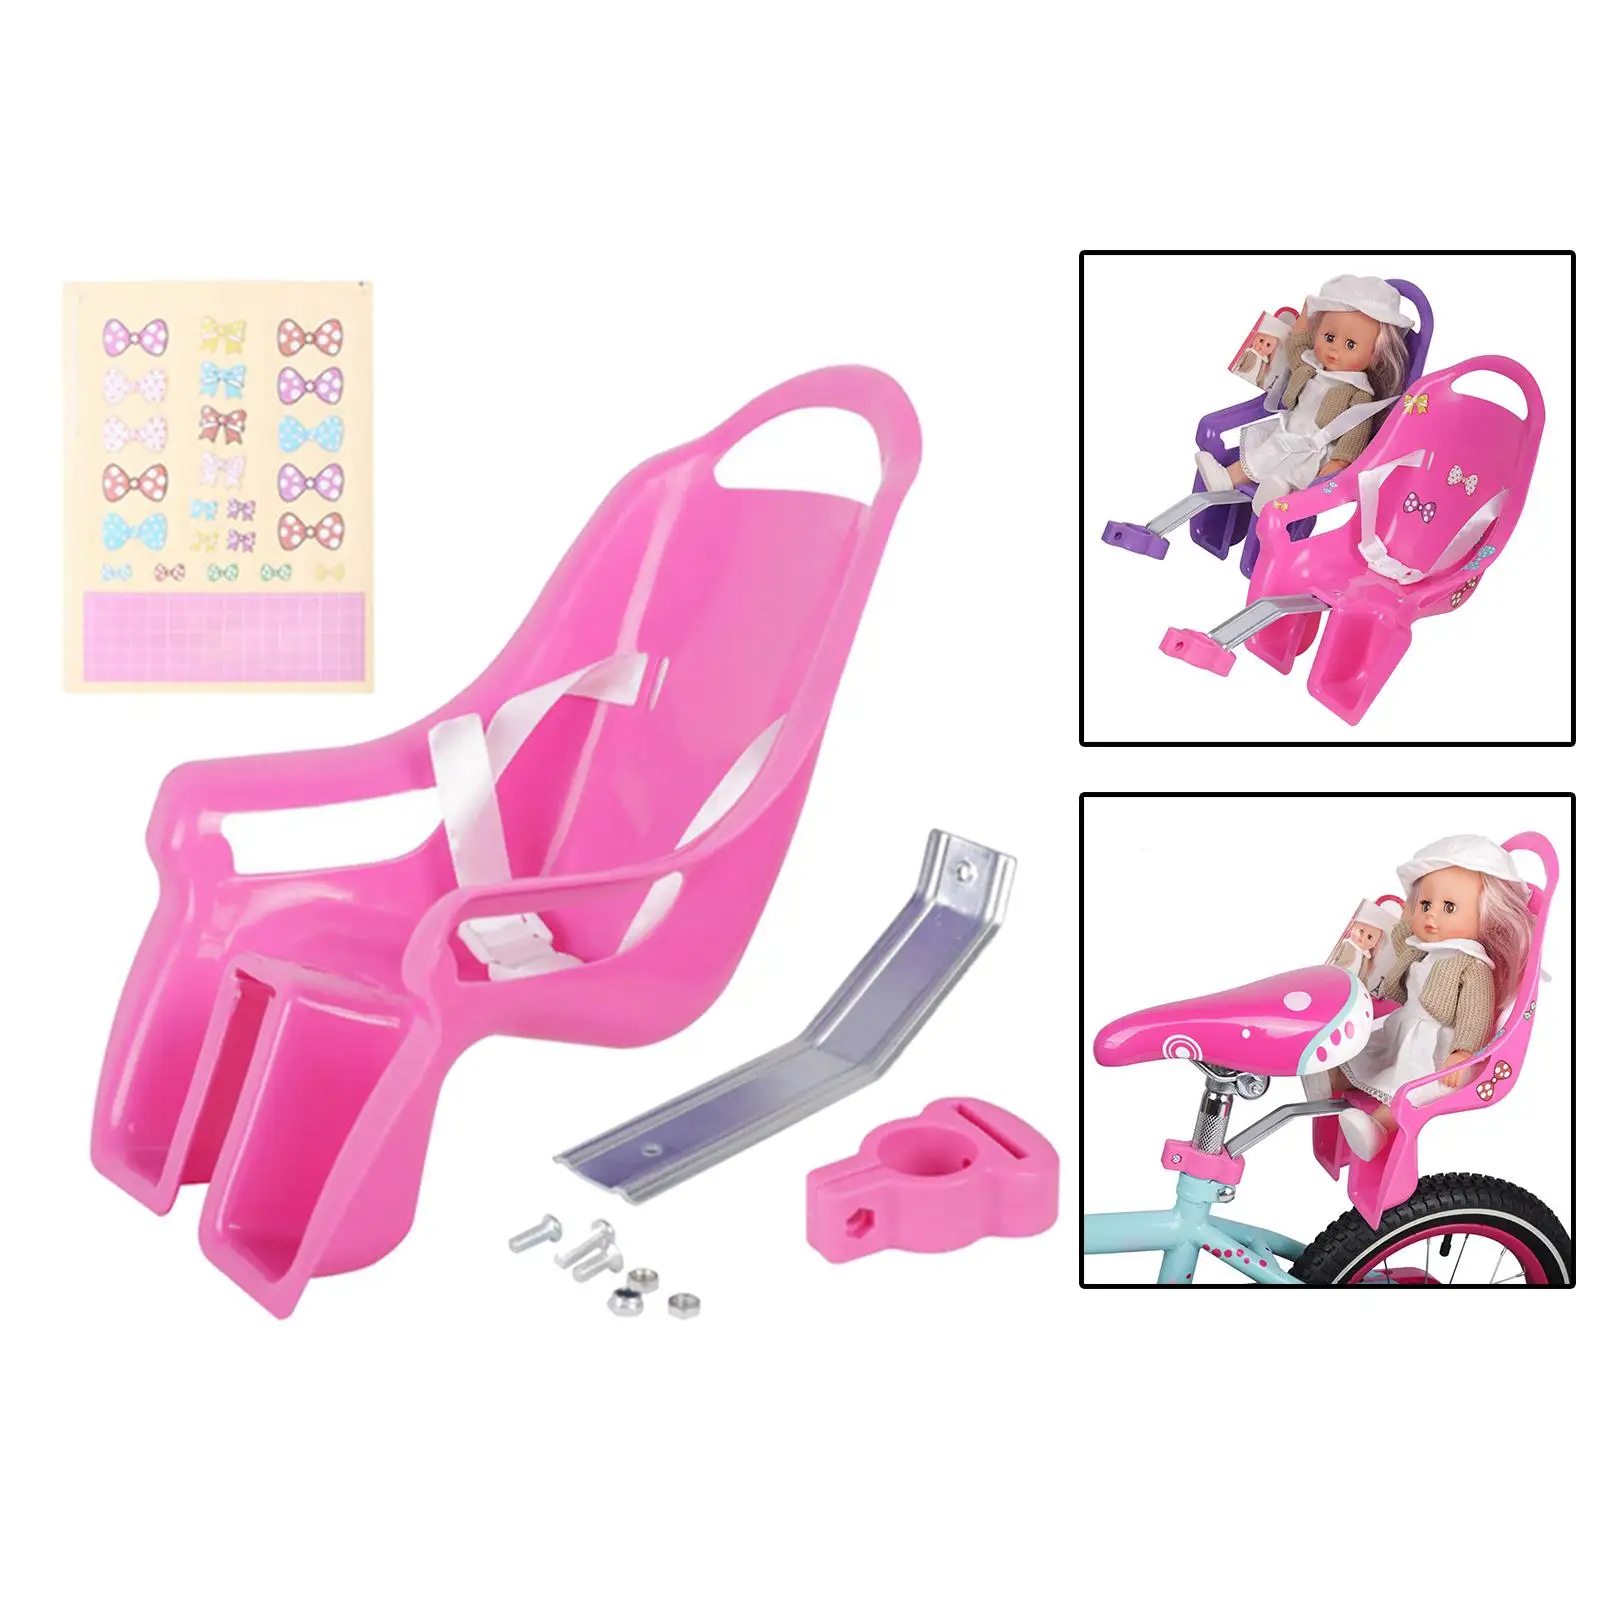 Girls Bike Doll Seat Children Gifts with DIY Decals Kids Bike Decoration Bicycle Accessories for Girls Kids